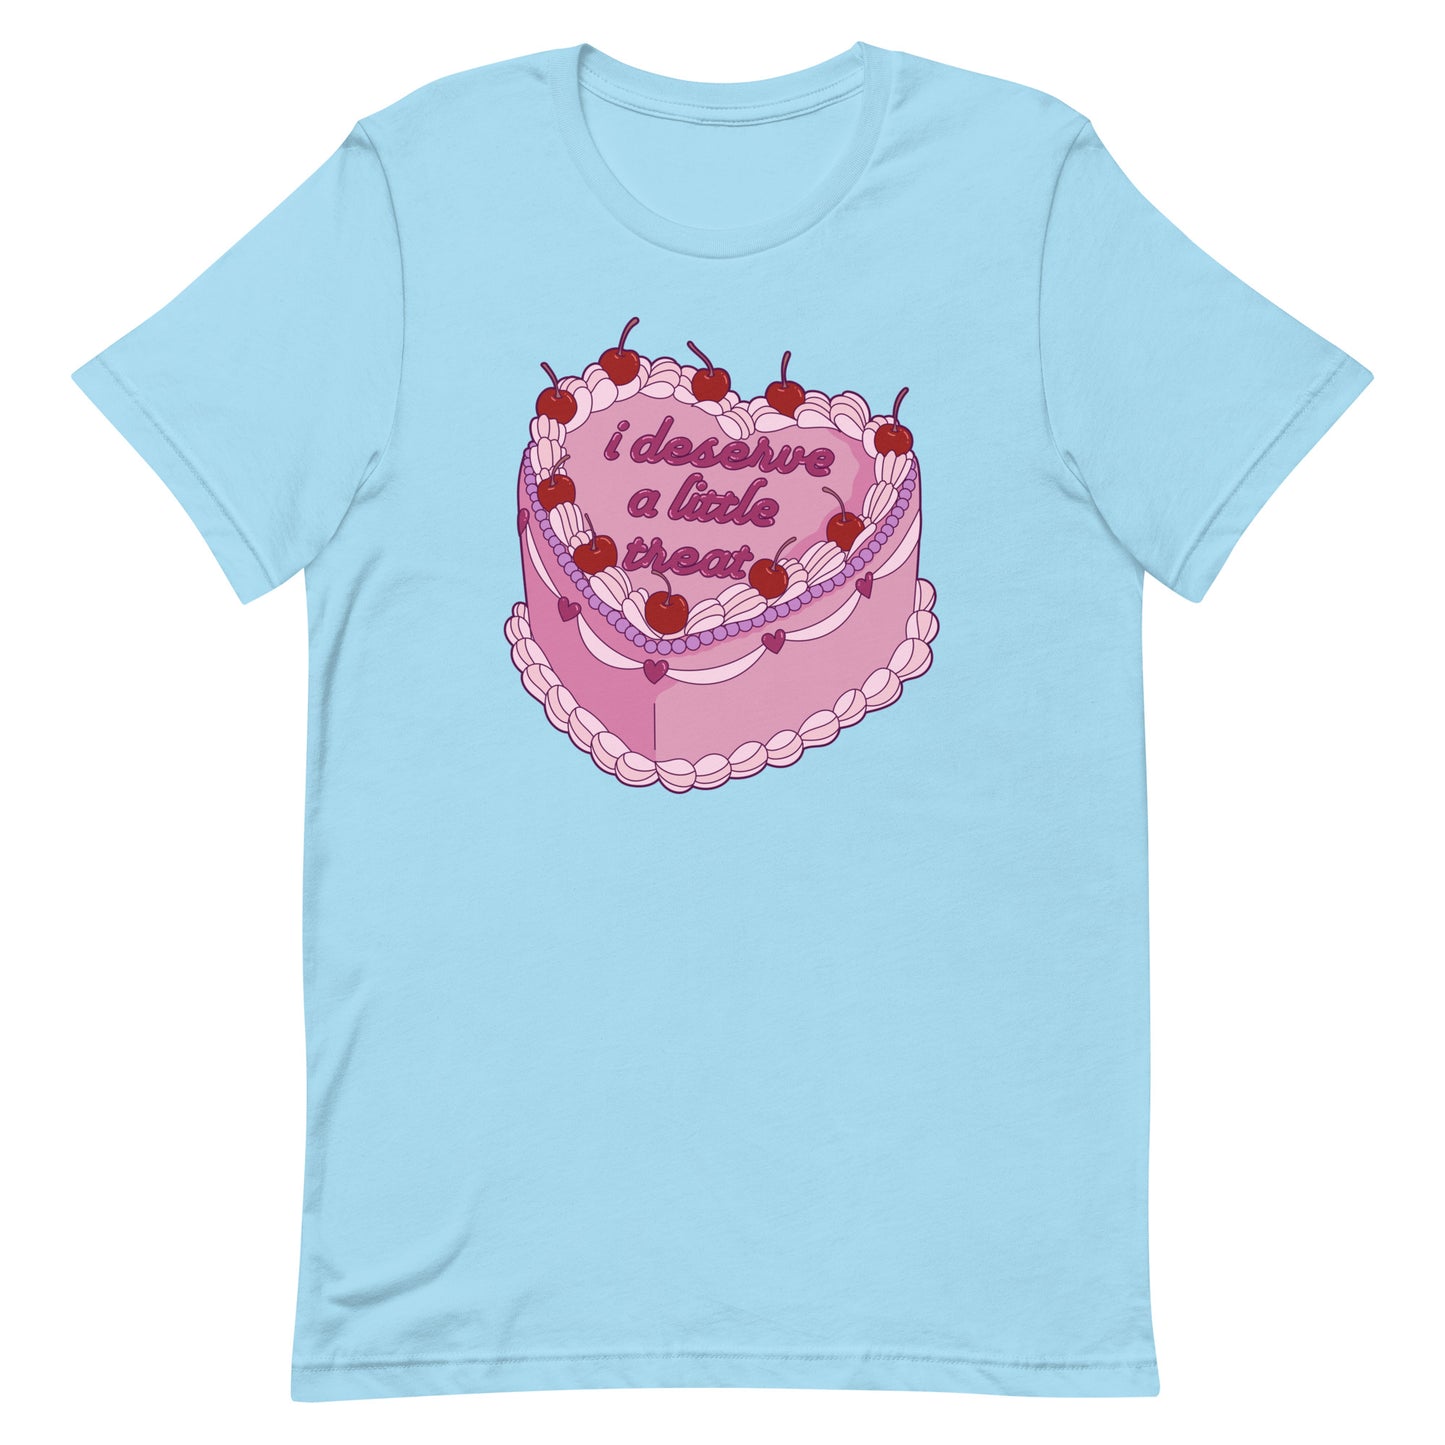 A light blue crewneck t-shirt featuring an illustration of an elaborately decorated pink cake. Icing on the cake reads "i deserve a little treat" in a cursive font.